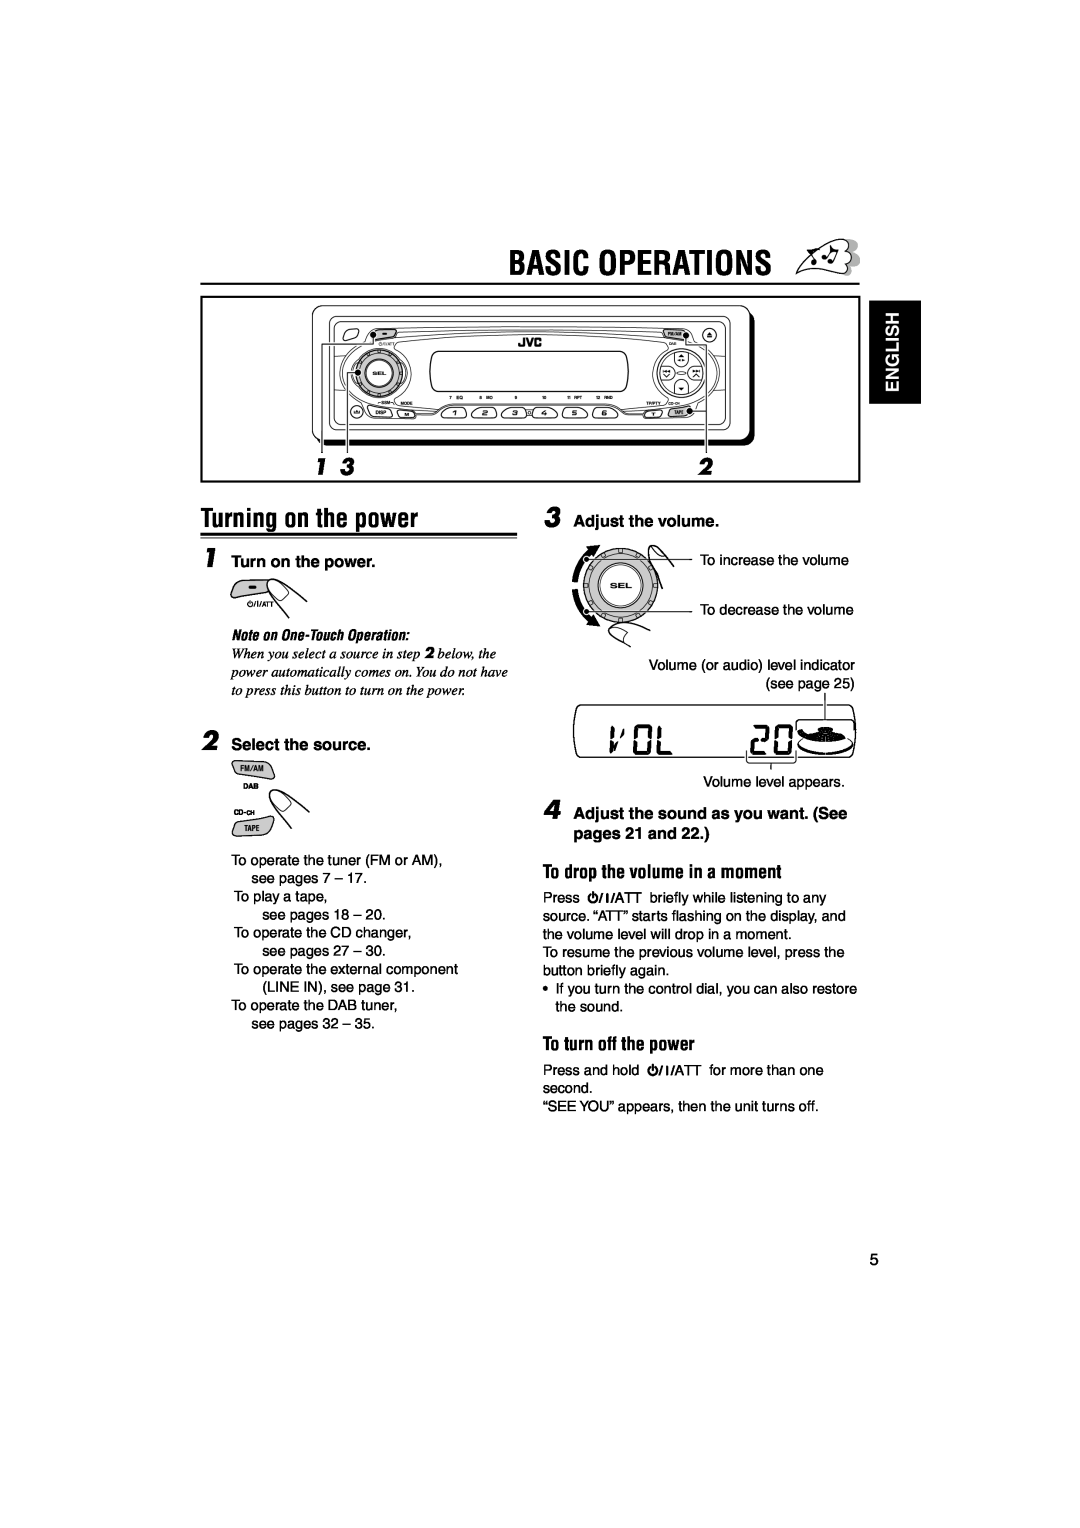 JVC KS-FX845R manual Turning on the power, To drop the volume in a moment, To turn off the power, Basic Operations, English 